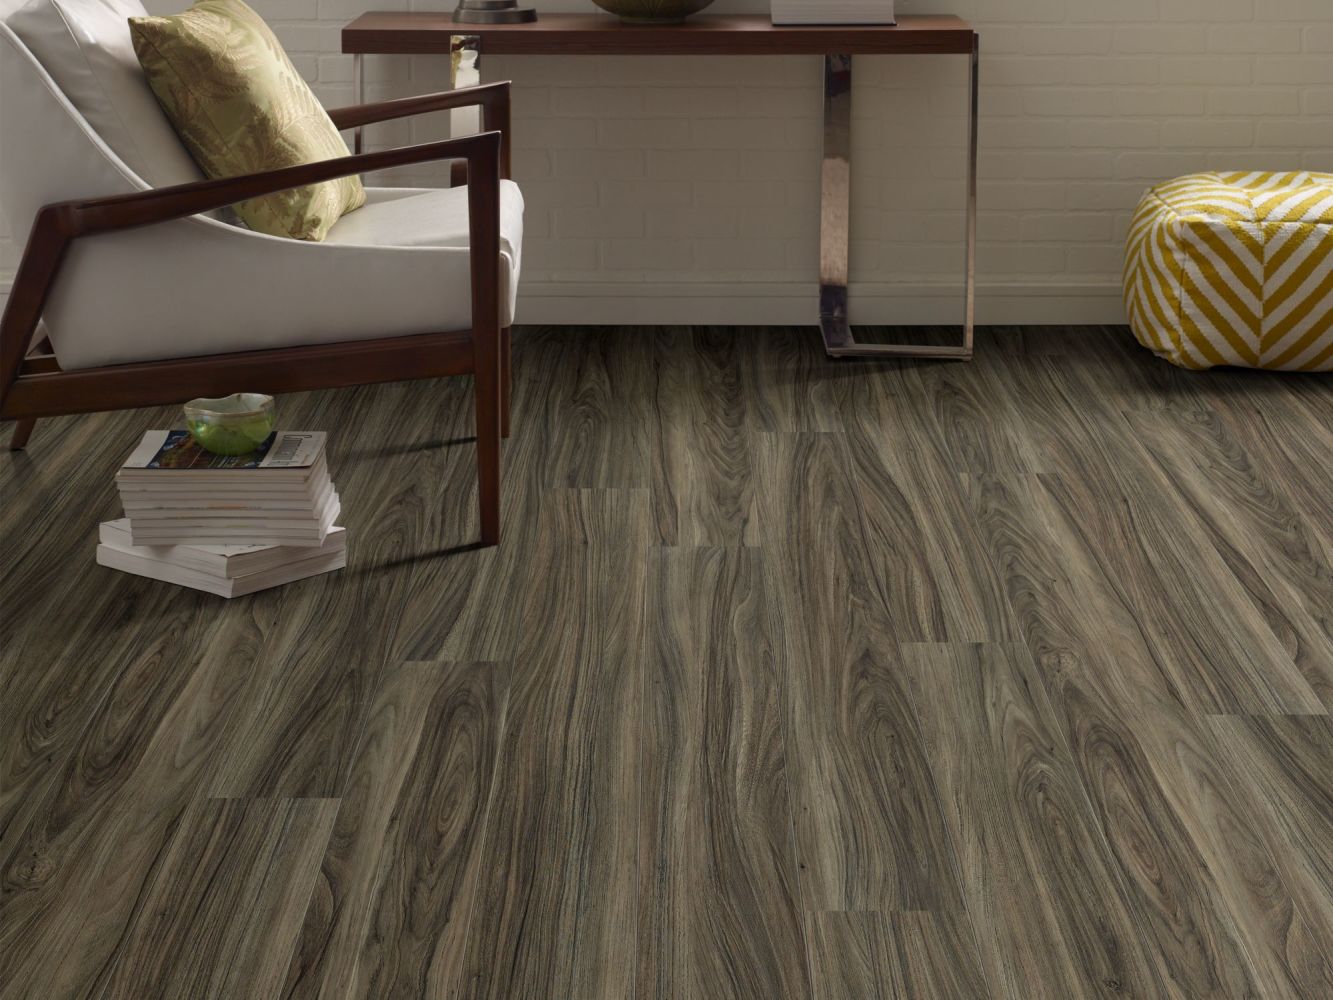 Shaw Floors Dr Horton Cosmo Plank Costa 00150_DR001